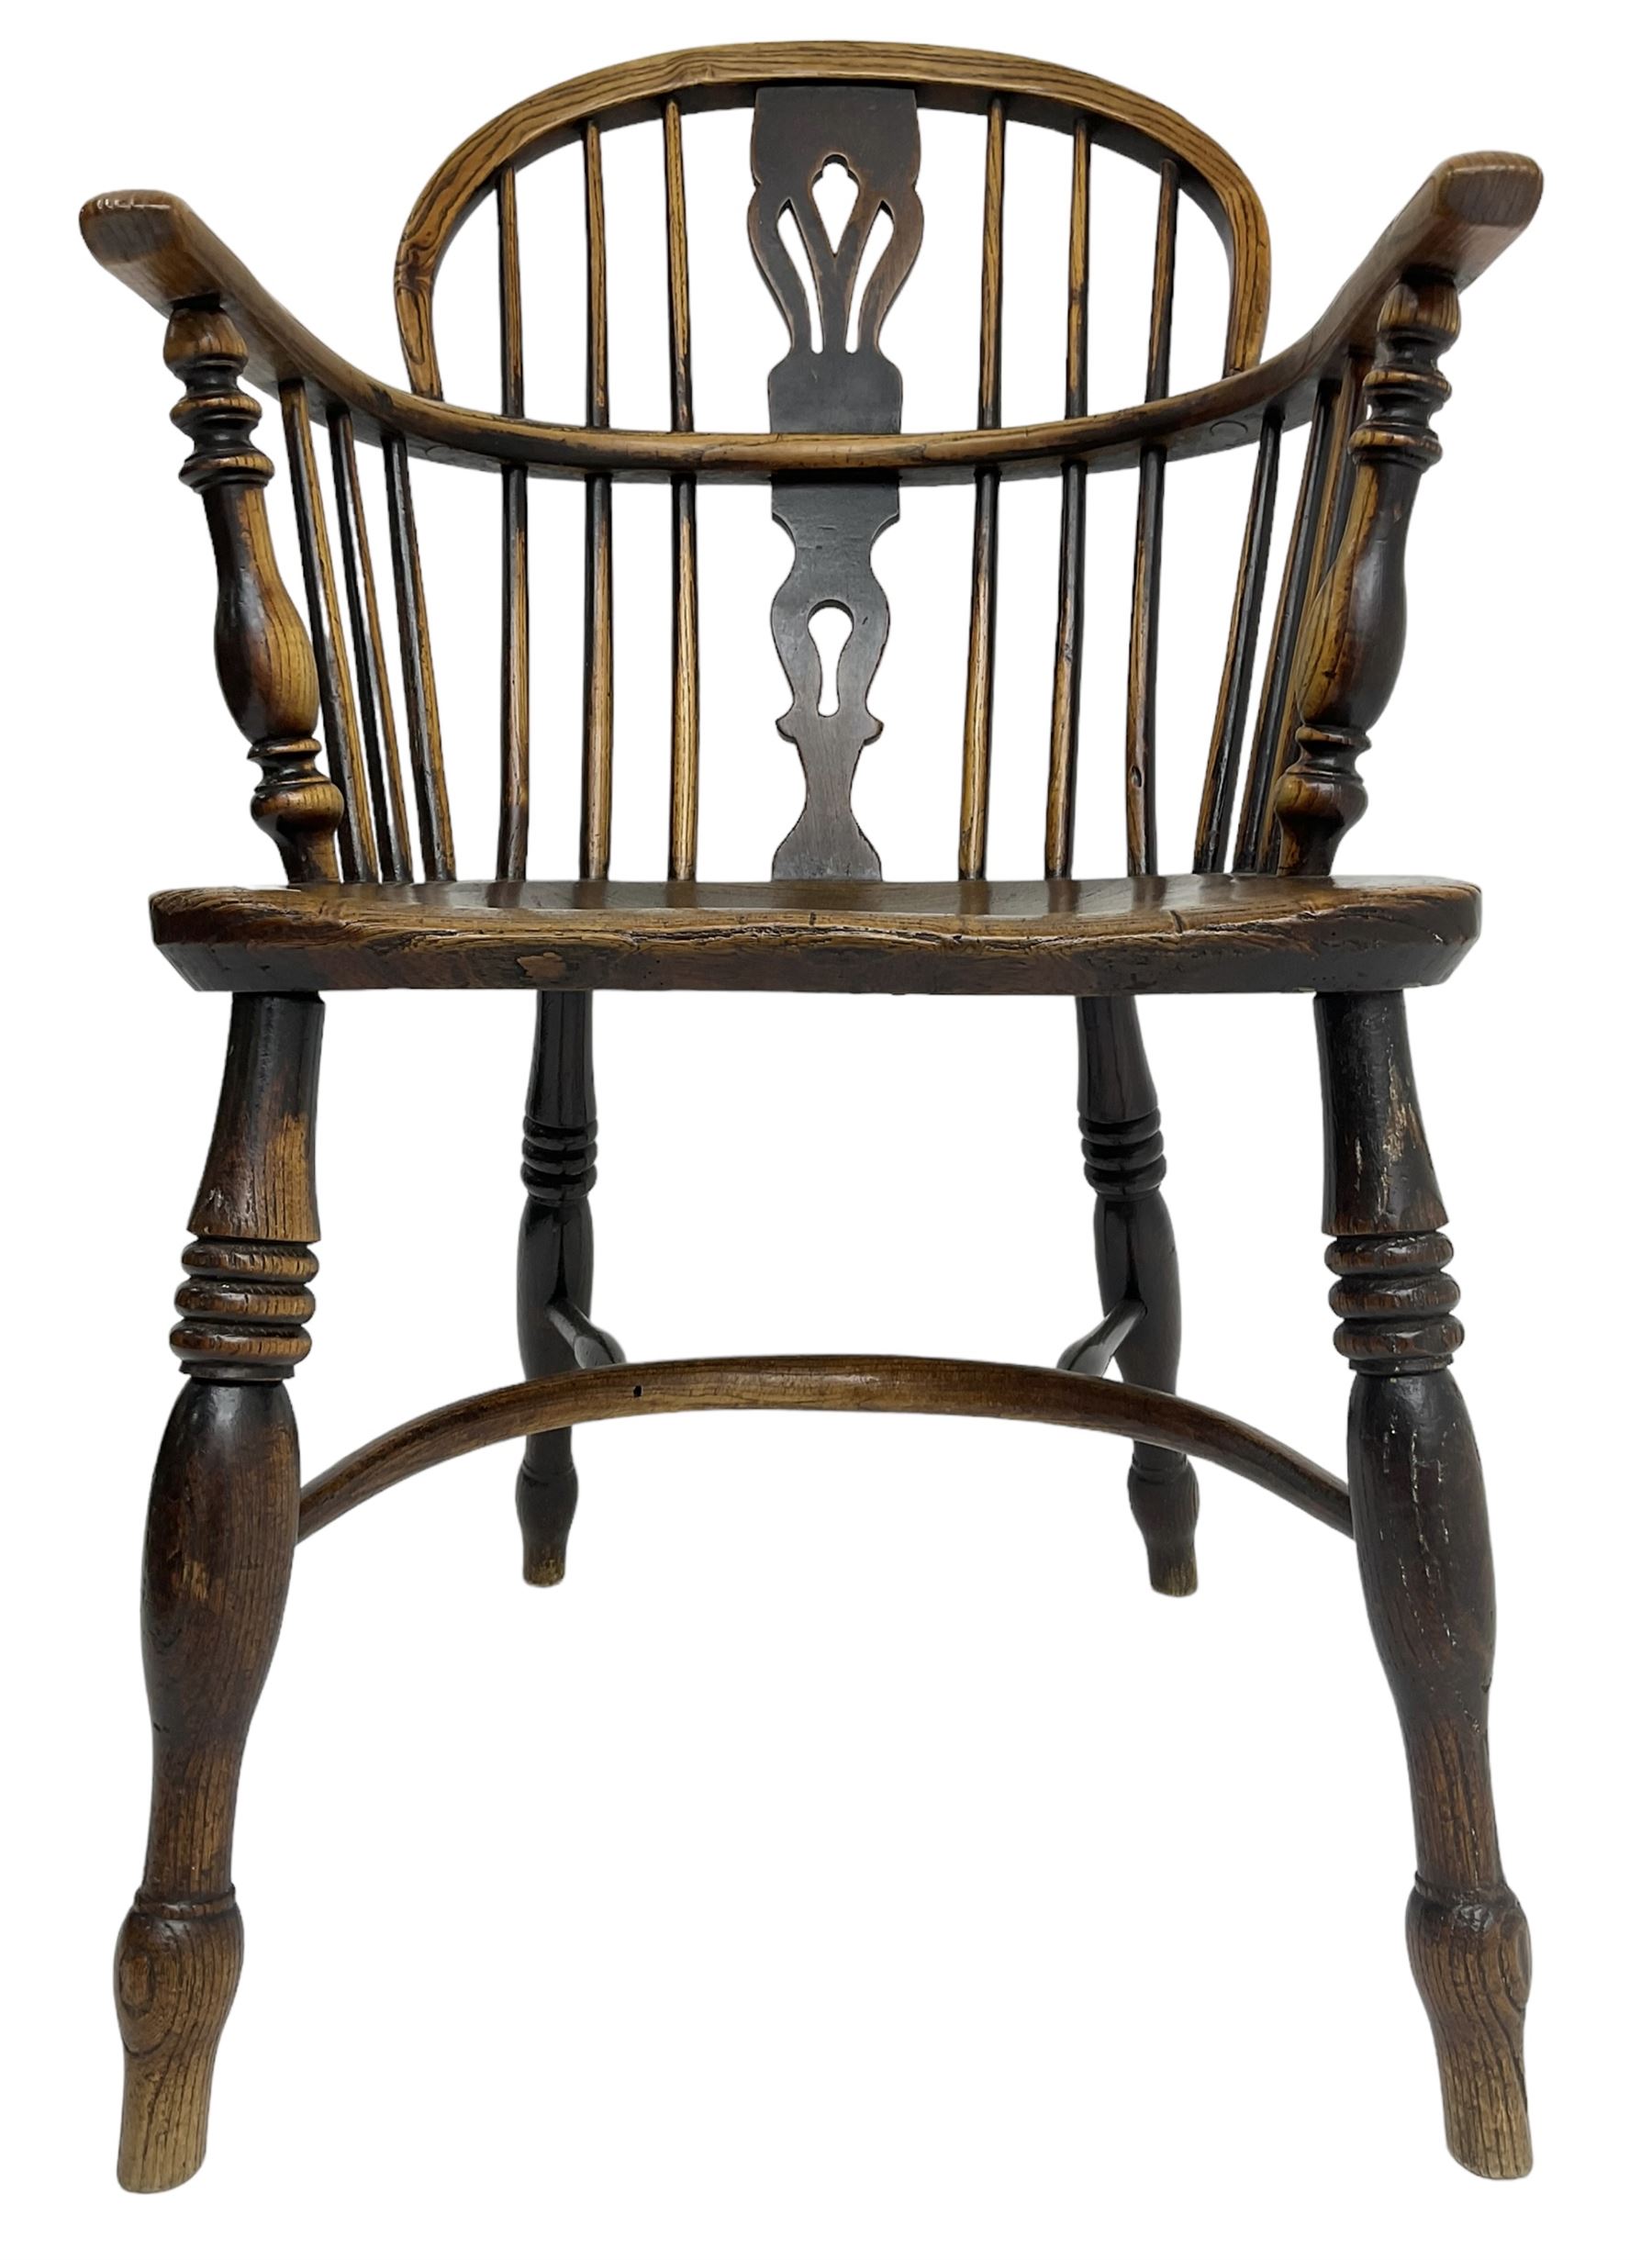 19th century elm and ash Windsor armchair - Image 4 of 7